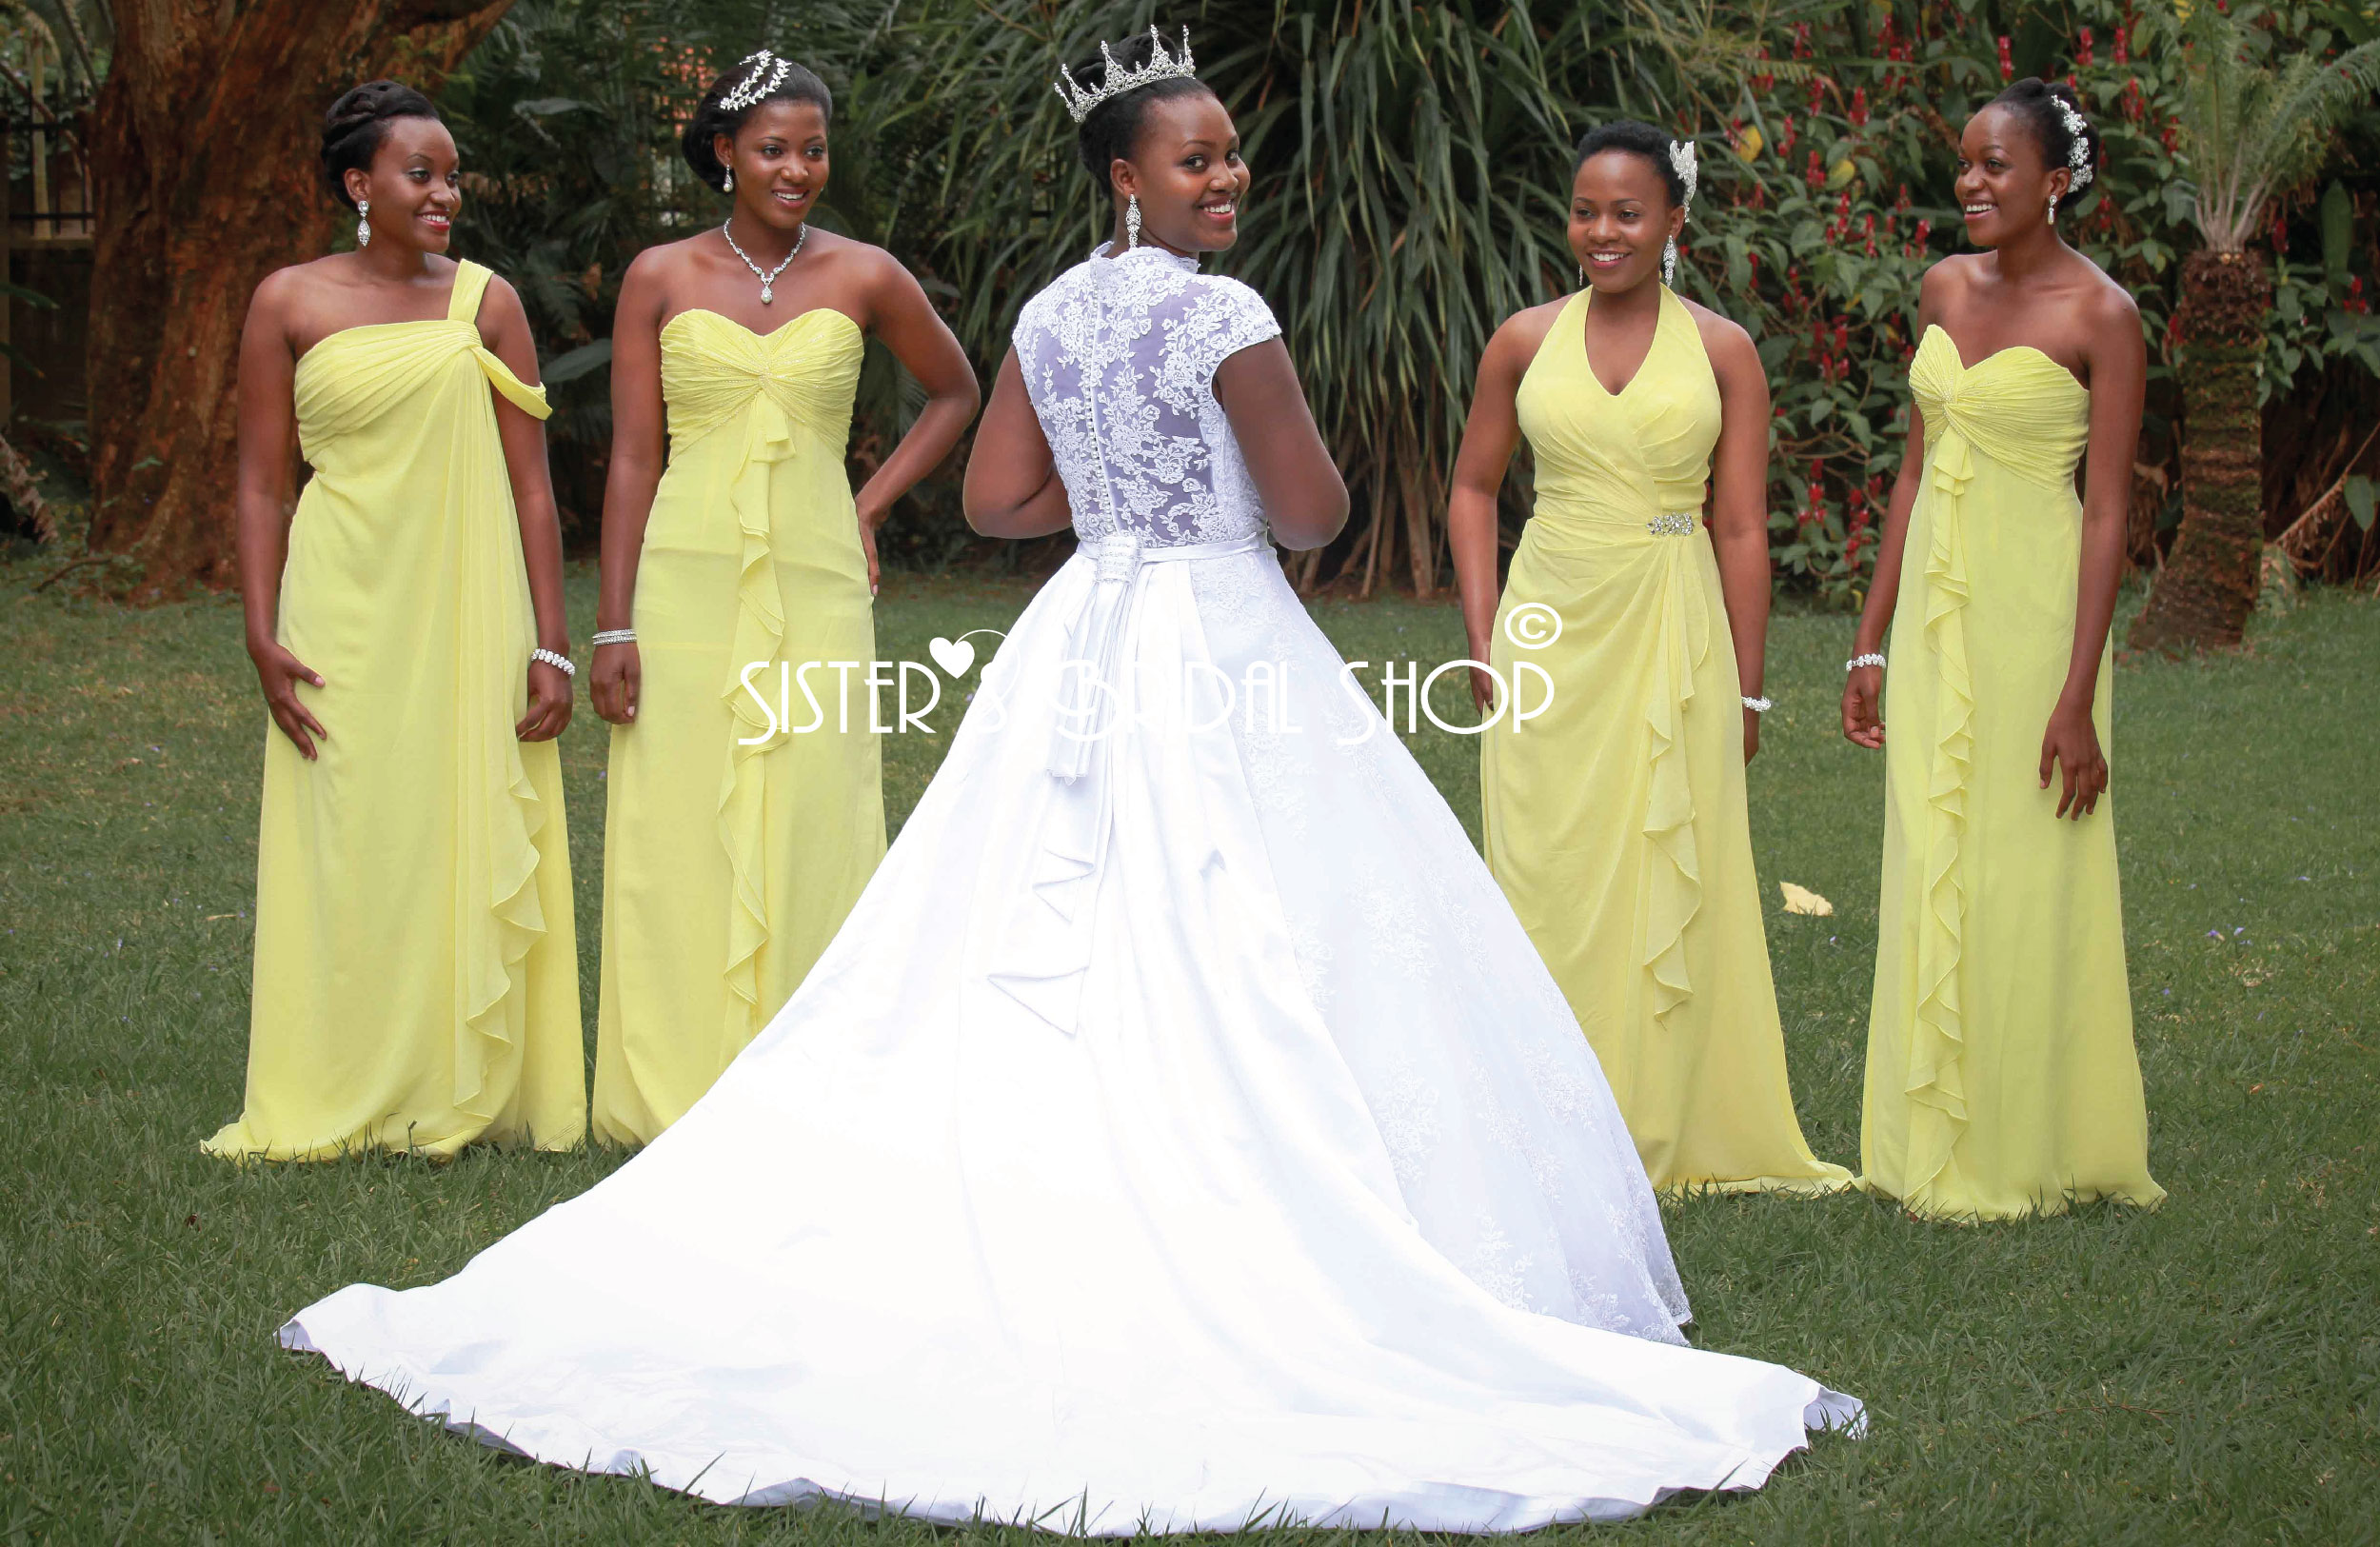 Get a Bridal Gown from Sisters Bridal Shop